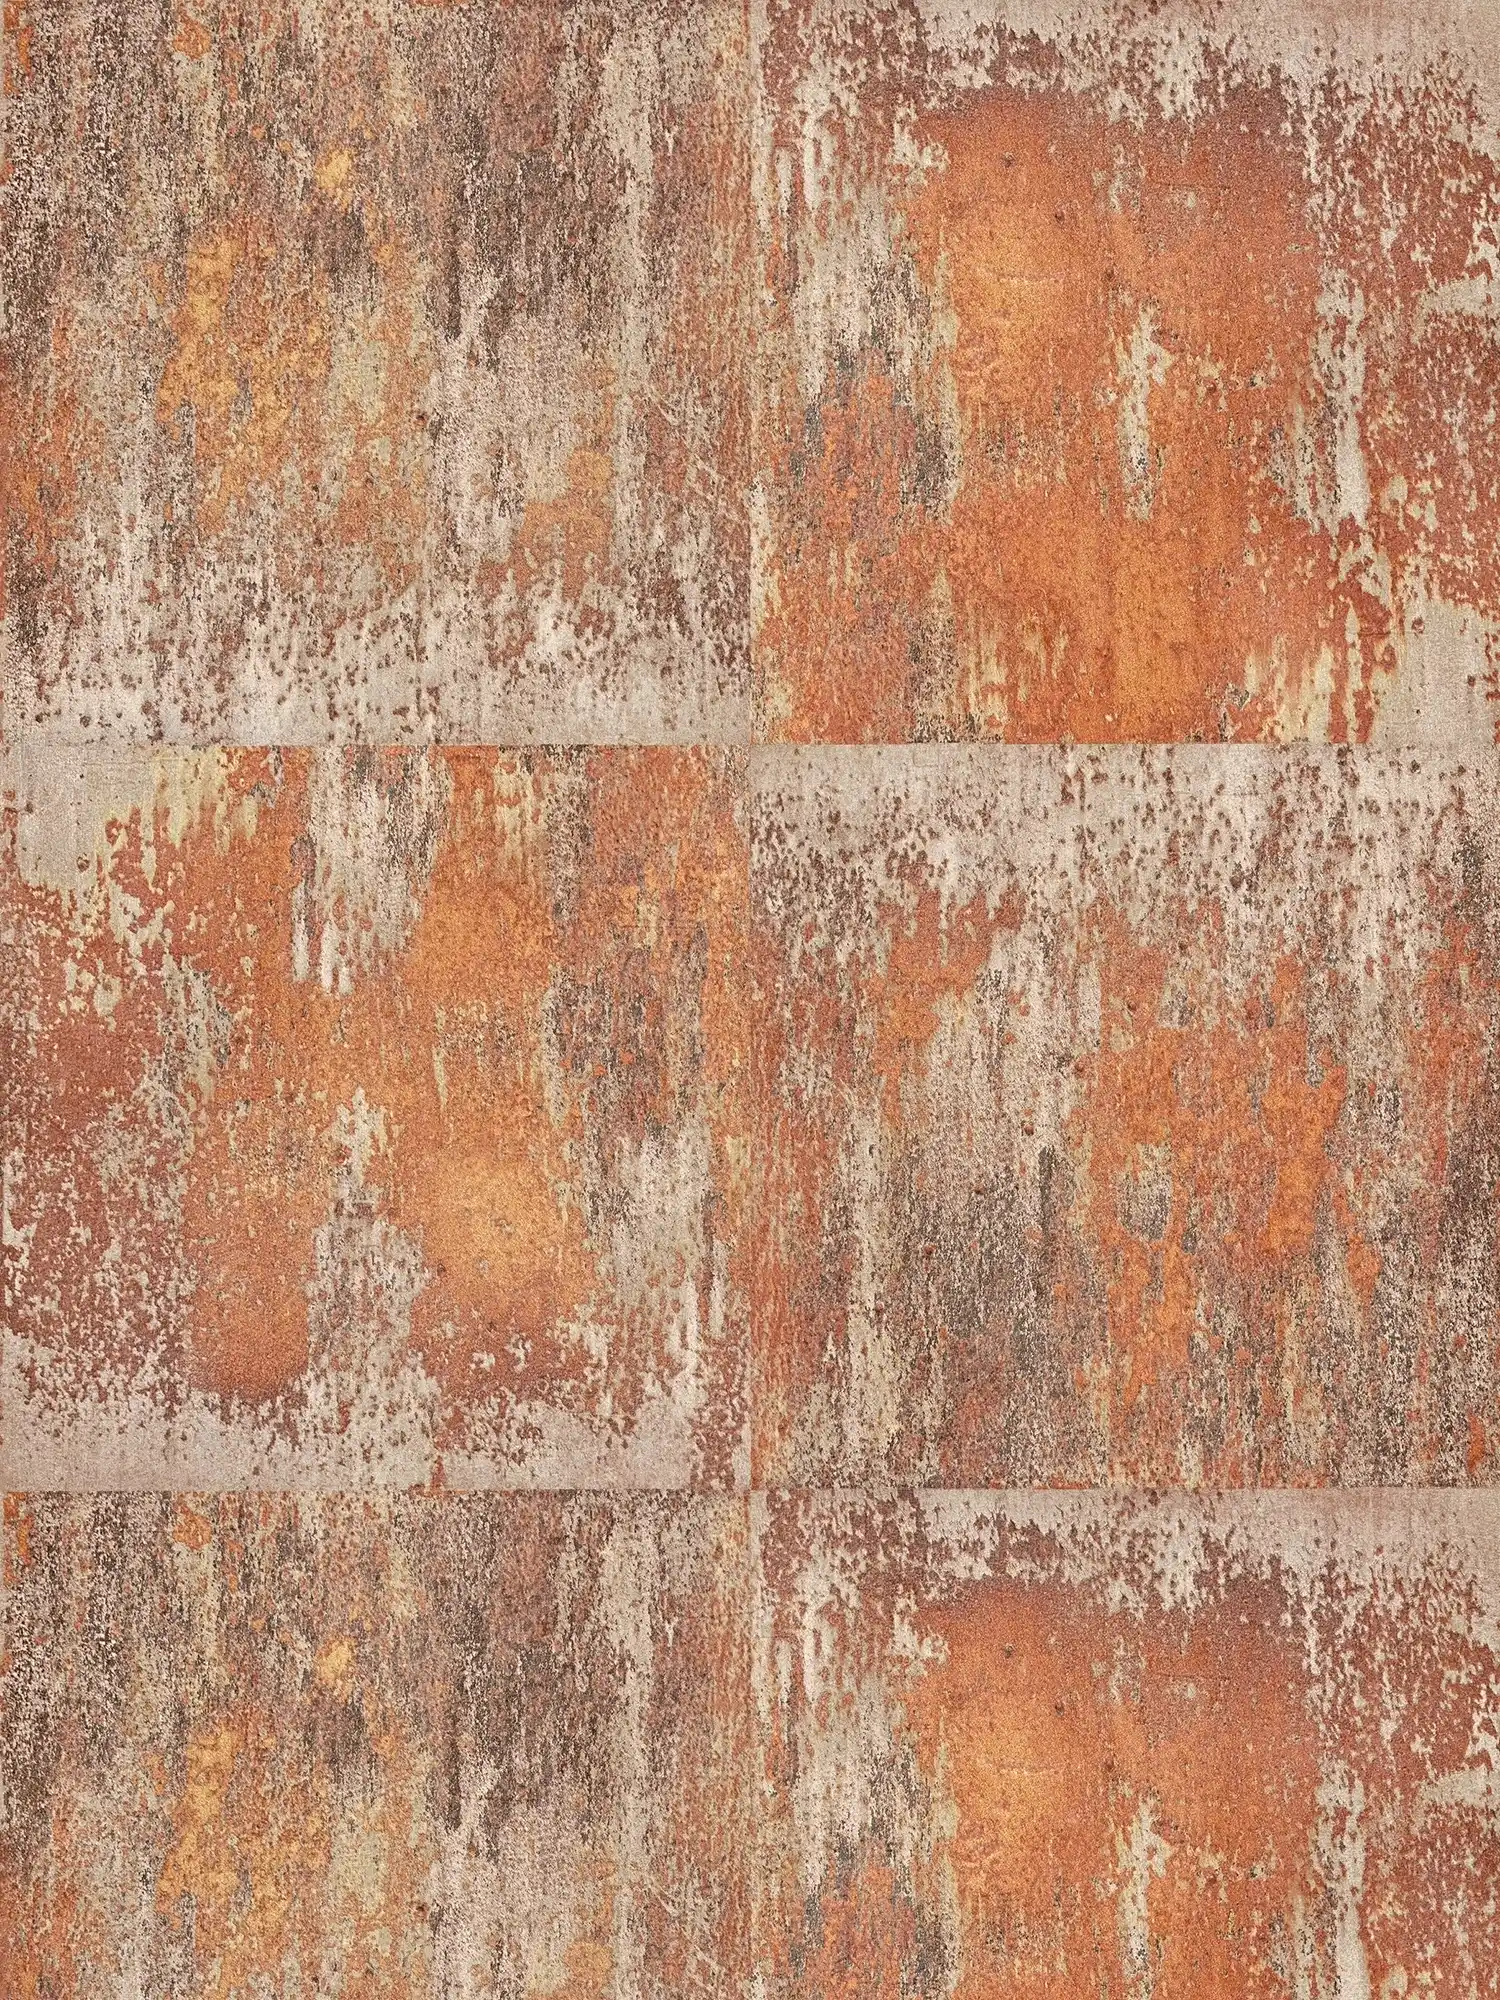 Non-woven wallpaper patina design with rust and copper effects - orange, brown, copper
